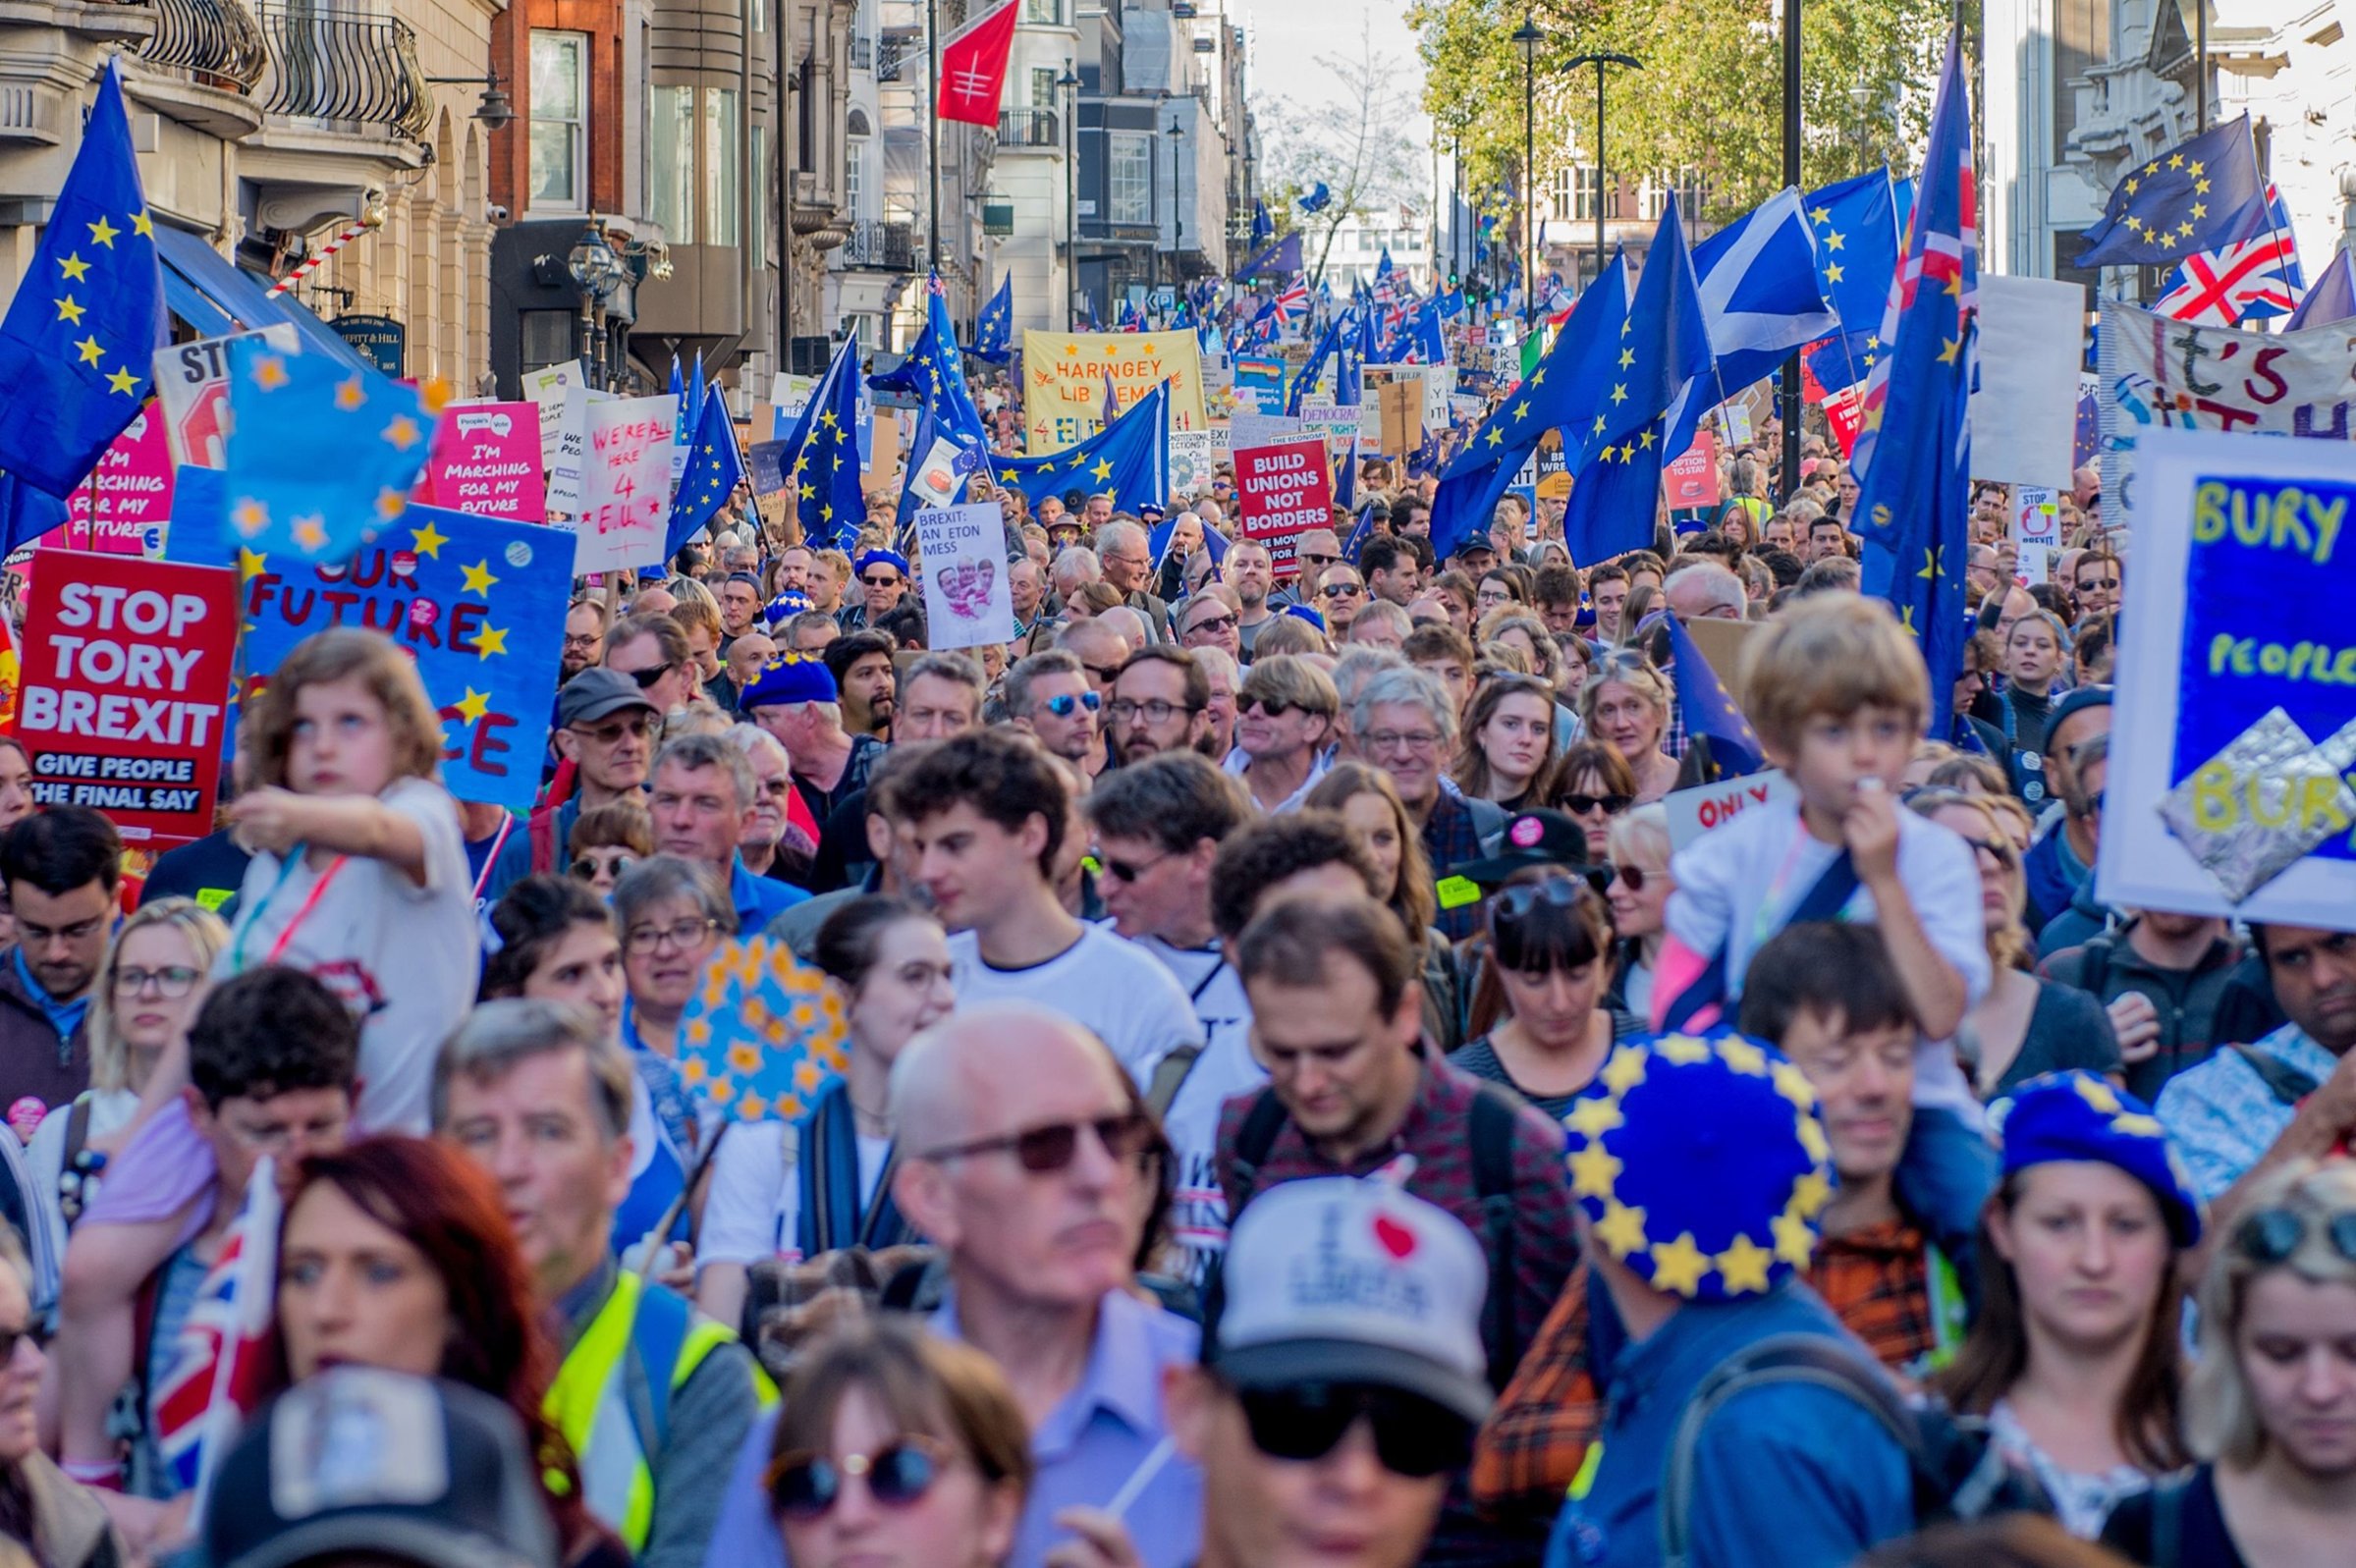 Some 700,000 people marched in London on Oct. 20 to demand a public vote on the final Brexit deal